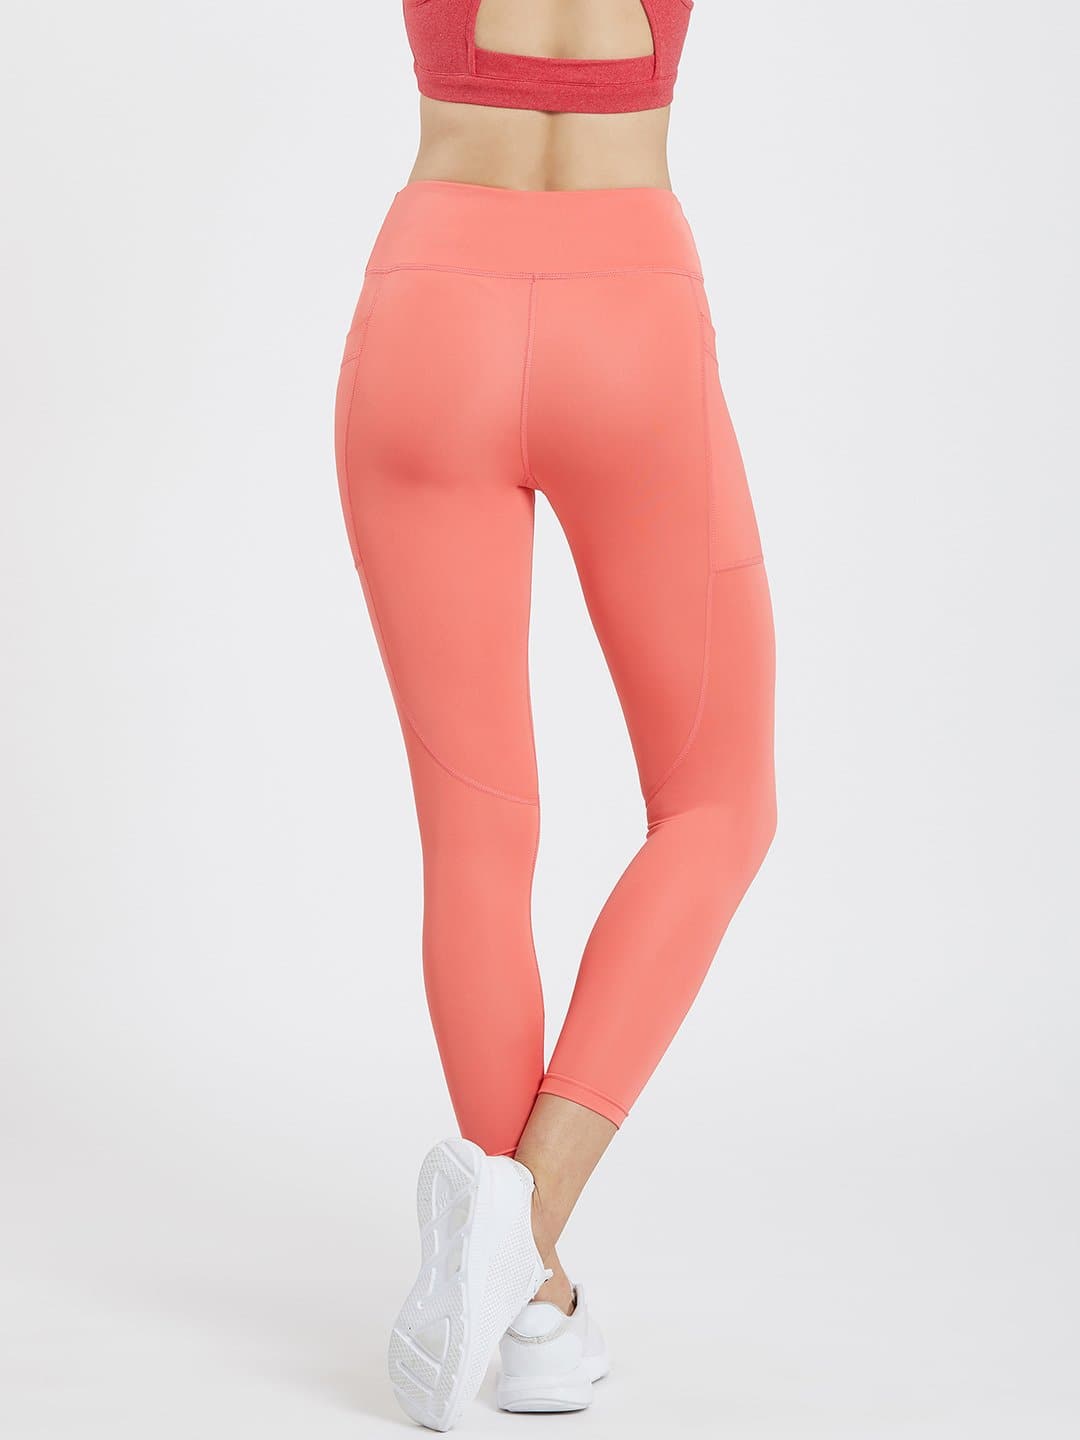 Maxtreme Power me Coral Ankle Pocket Leggings